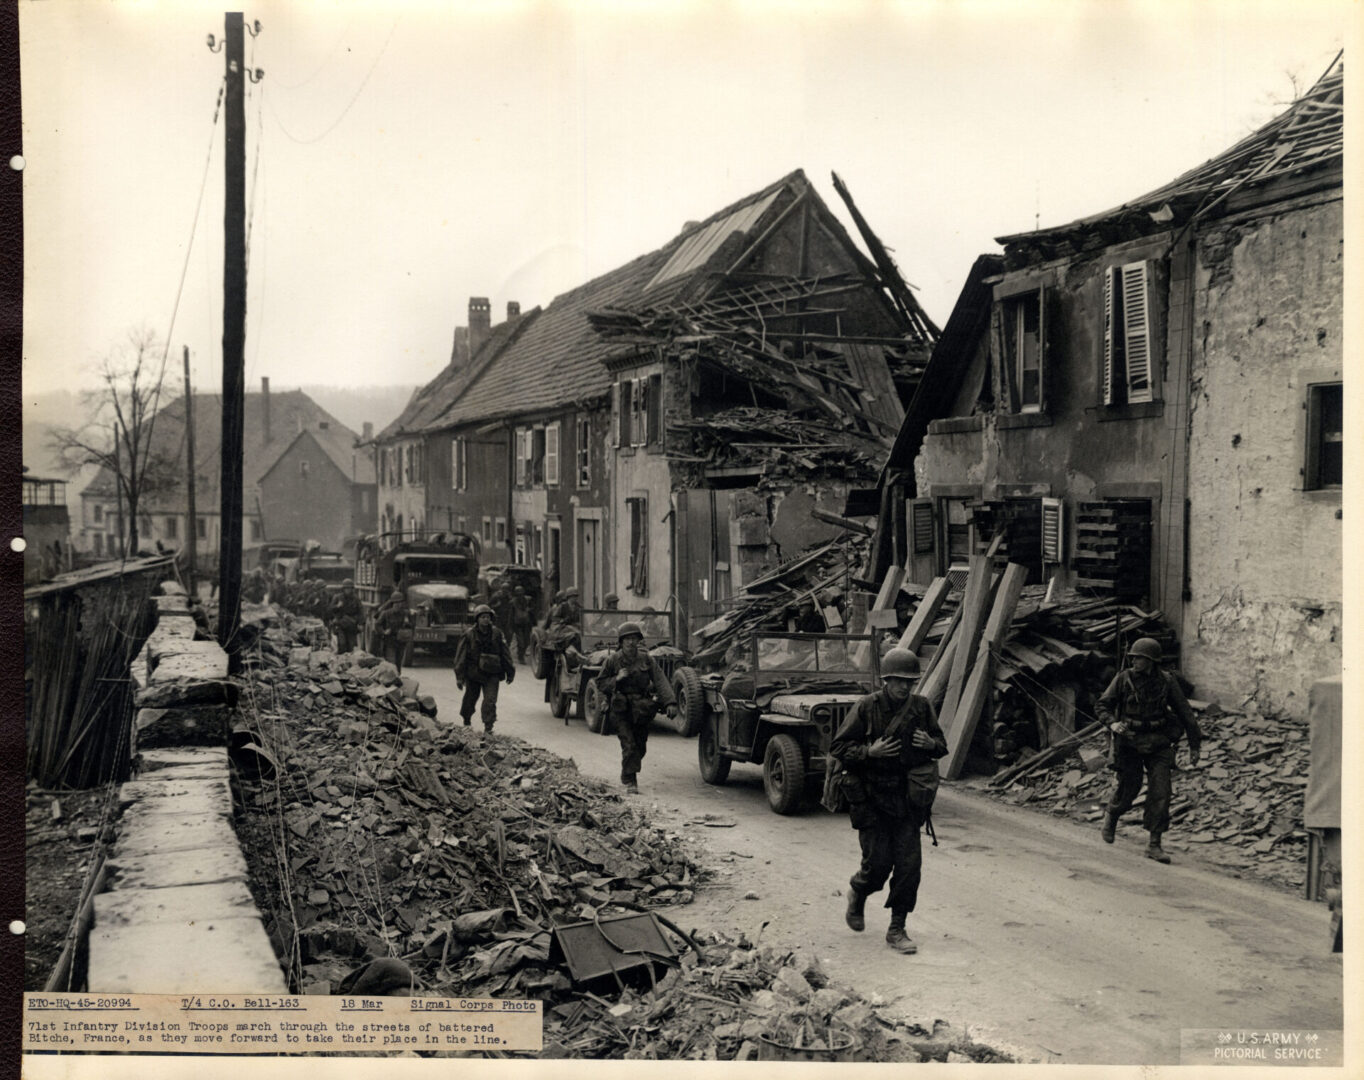 Soldiers marching through the streets of Bitche, France